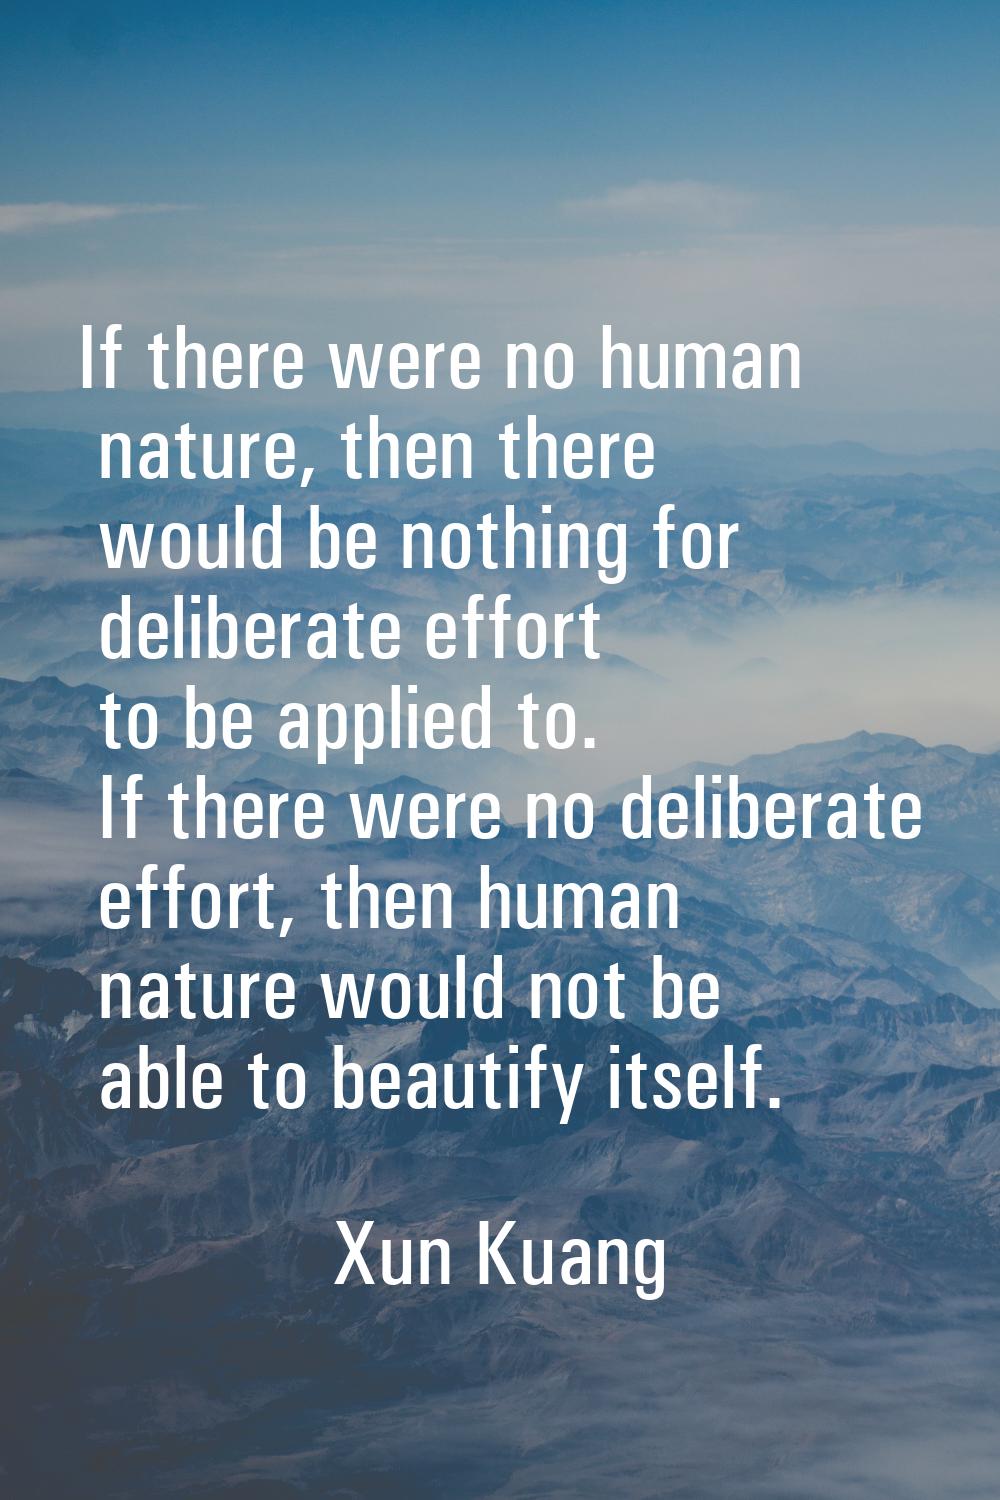 If there were no human nature, then there would be nothing for deliberate effort to be applied to. 